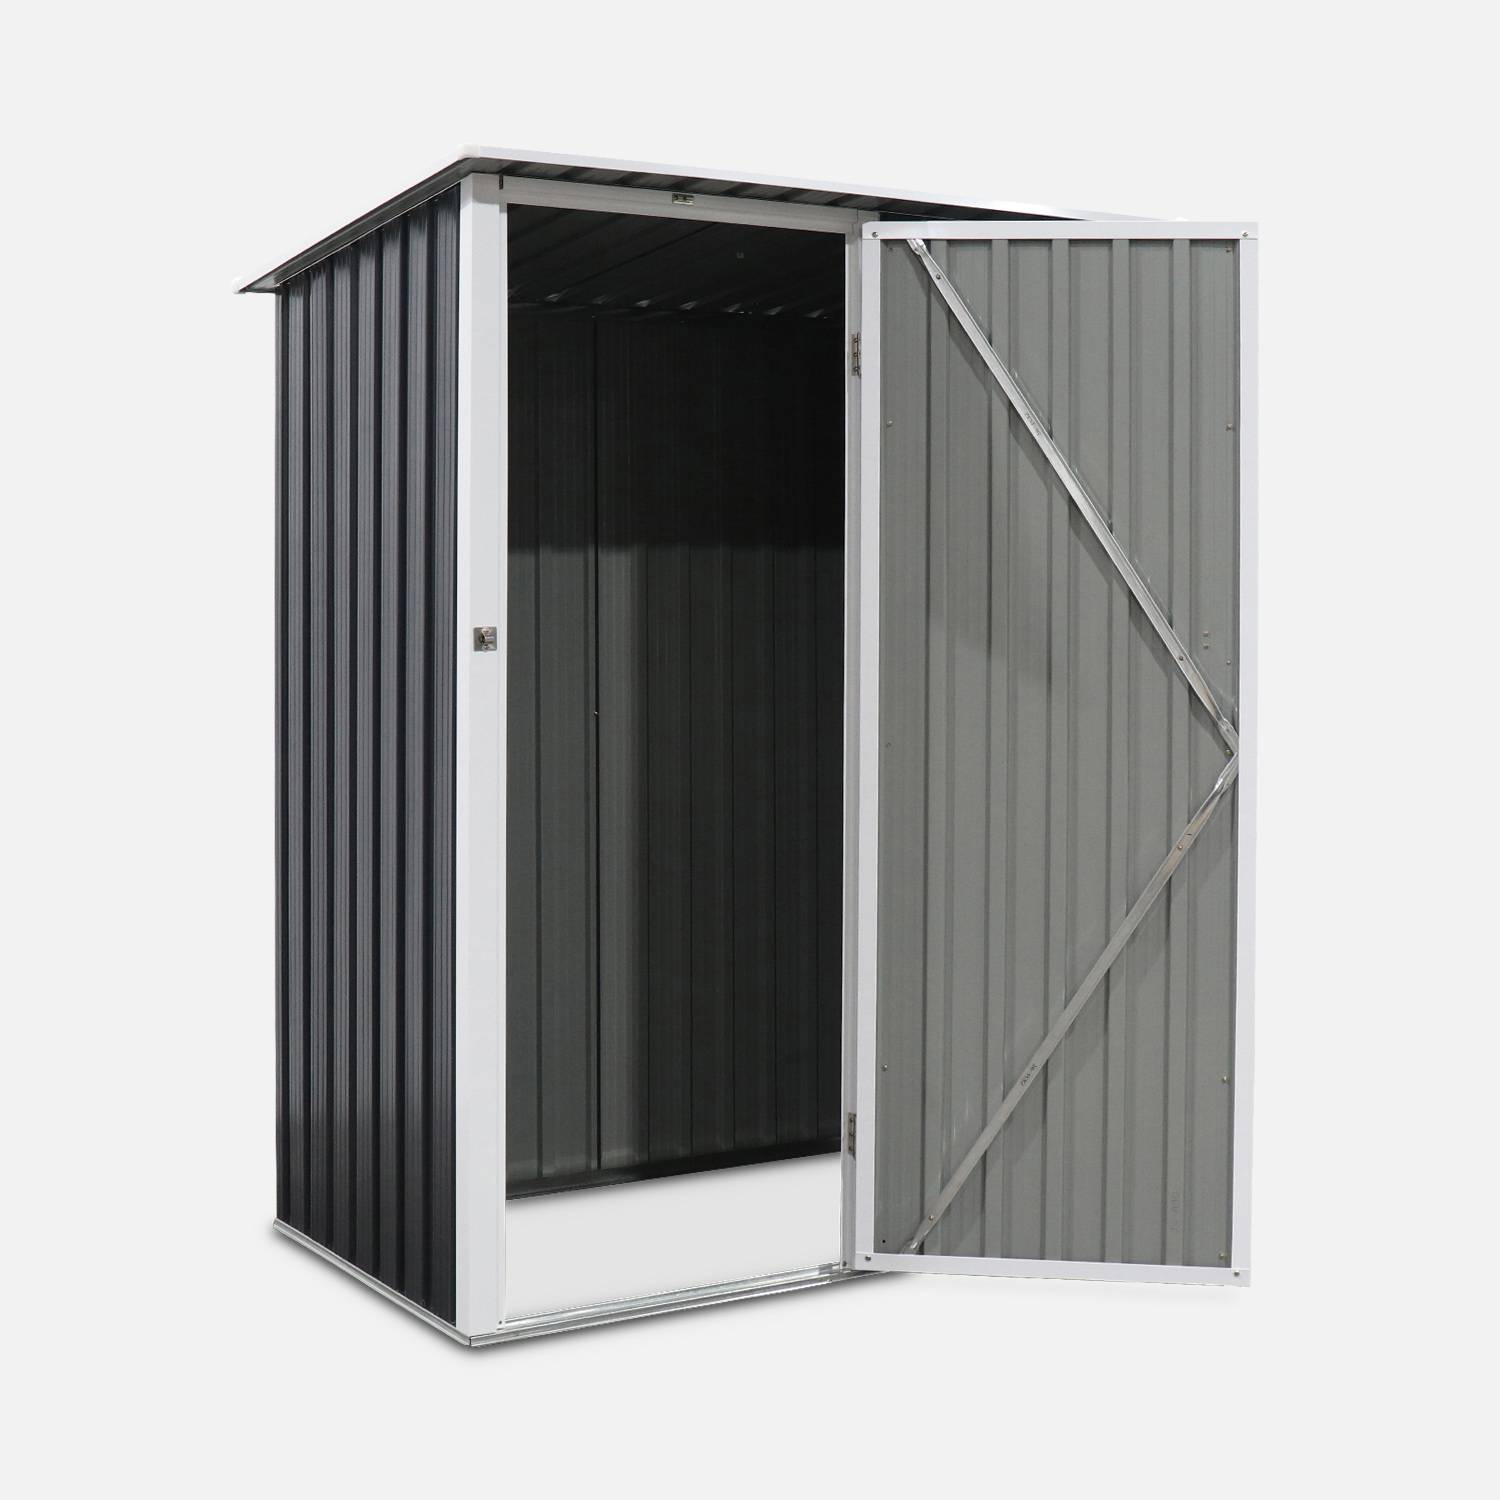 (4.6 X 3.1FT) 1.36m² Metal garden shed - Tool shed with single latch door, ground fixing kit supplied - Lys - Grey and White,sweeek,Photo3